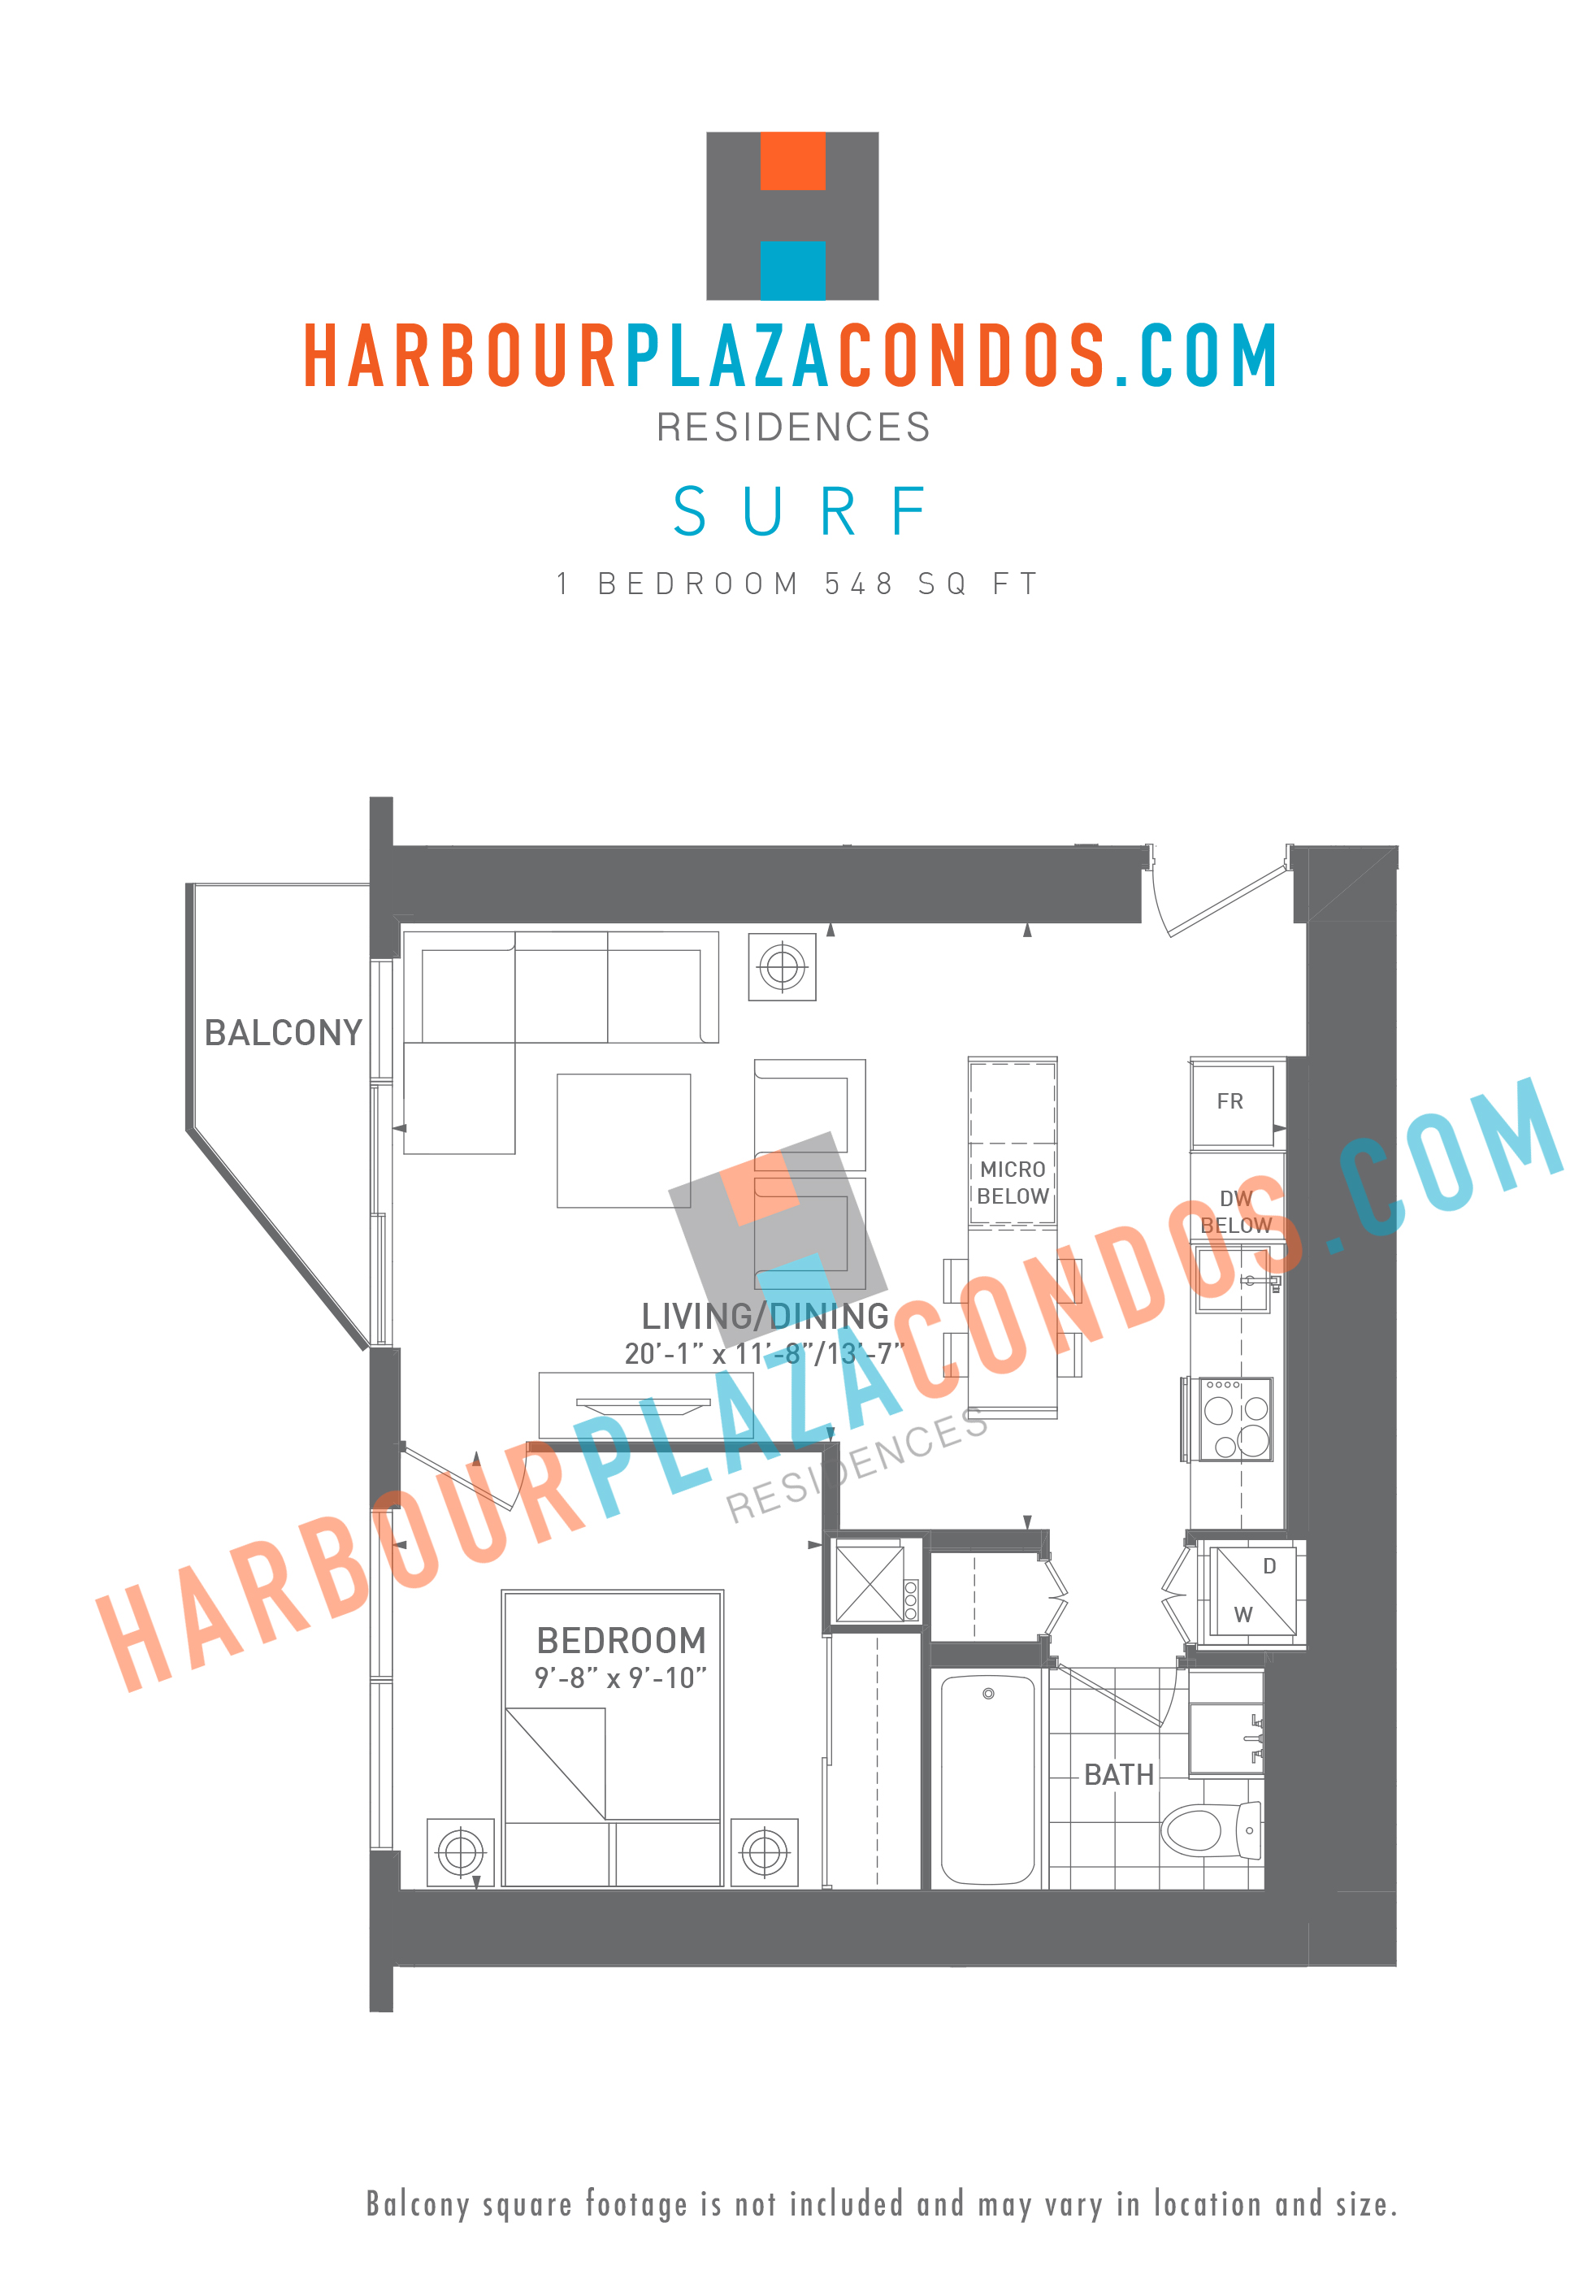 100 Harbour Street Harbour Plaza Condos For Sale / Rent